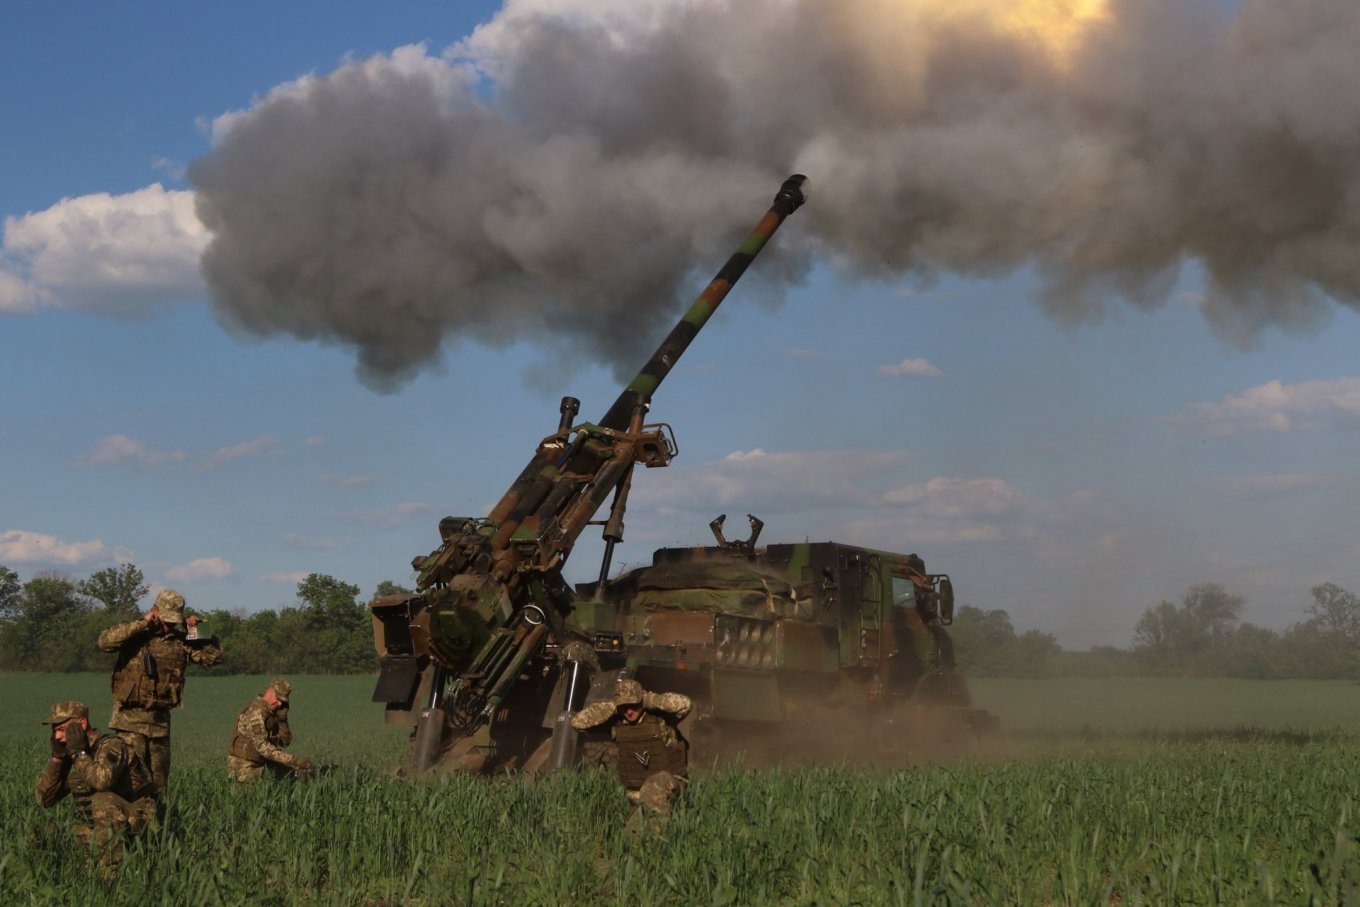 The Armed Forces fire from CAESAR self-propelled howitzer, France to Deliver More Caesar Howitzers to Ukraine, Defense Express